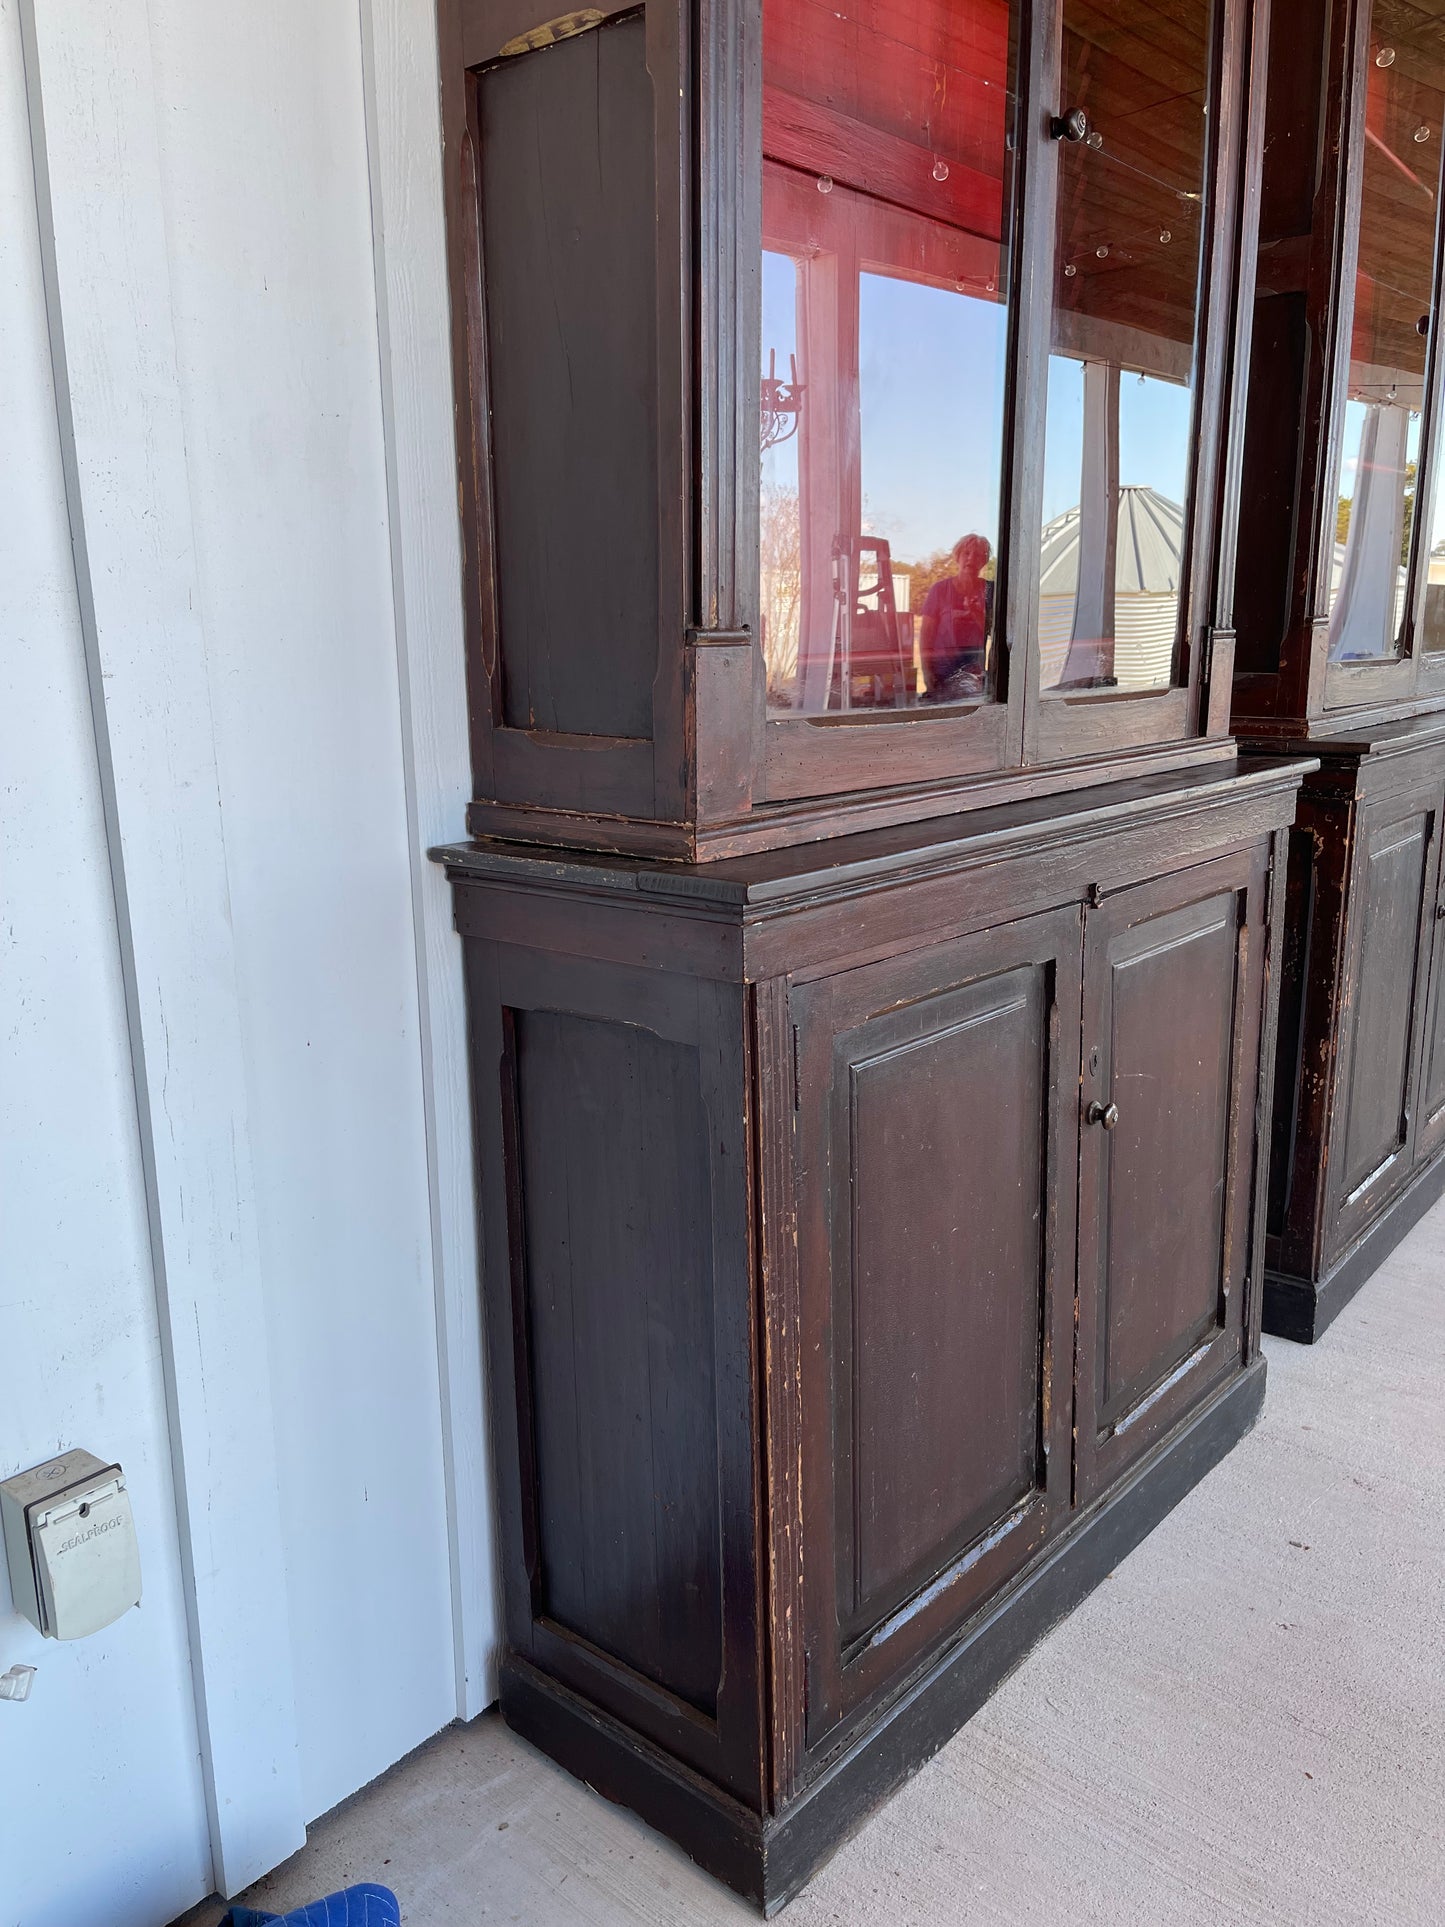 French Pharmacy Cabinets with Original Paint 1860